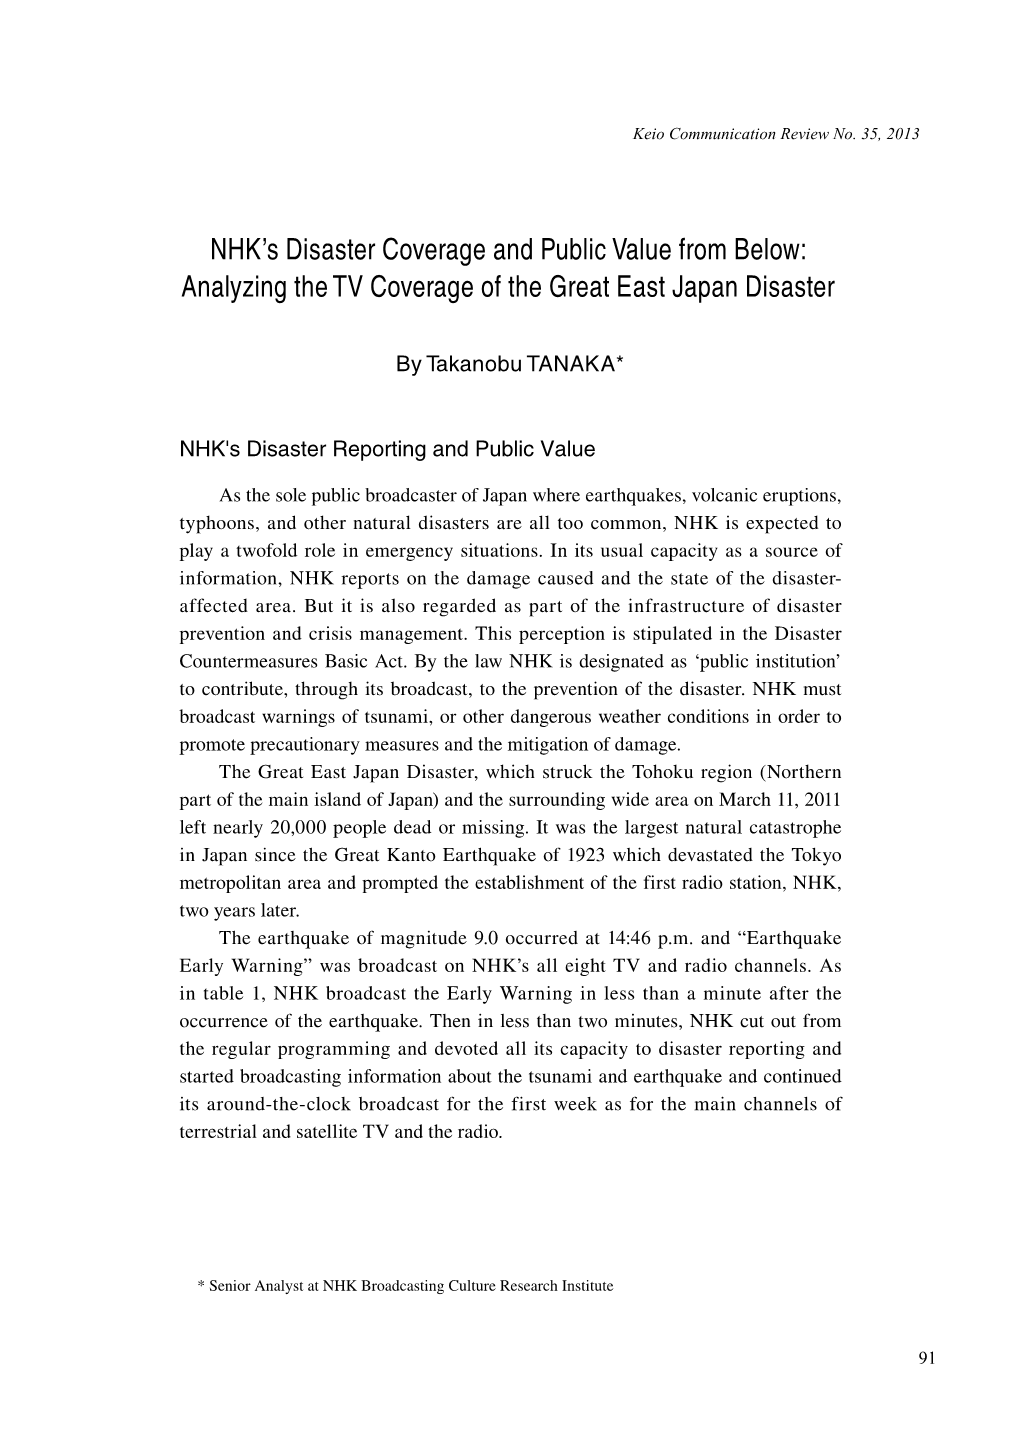 NHK's Disaster Coverage and Public Value from Below: Analyzing the TV